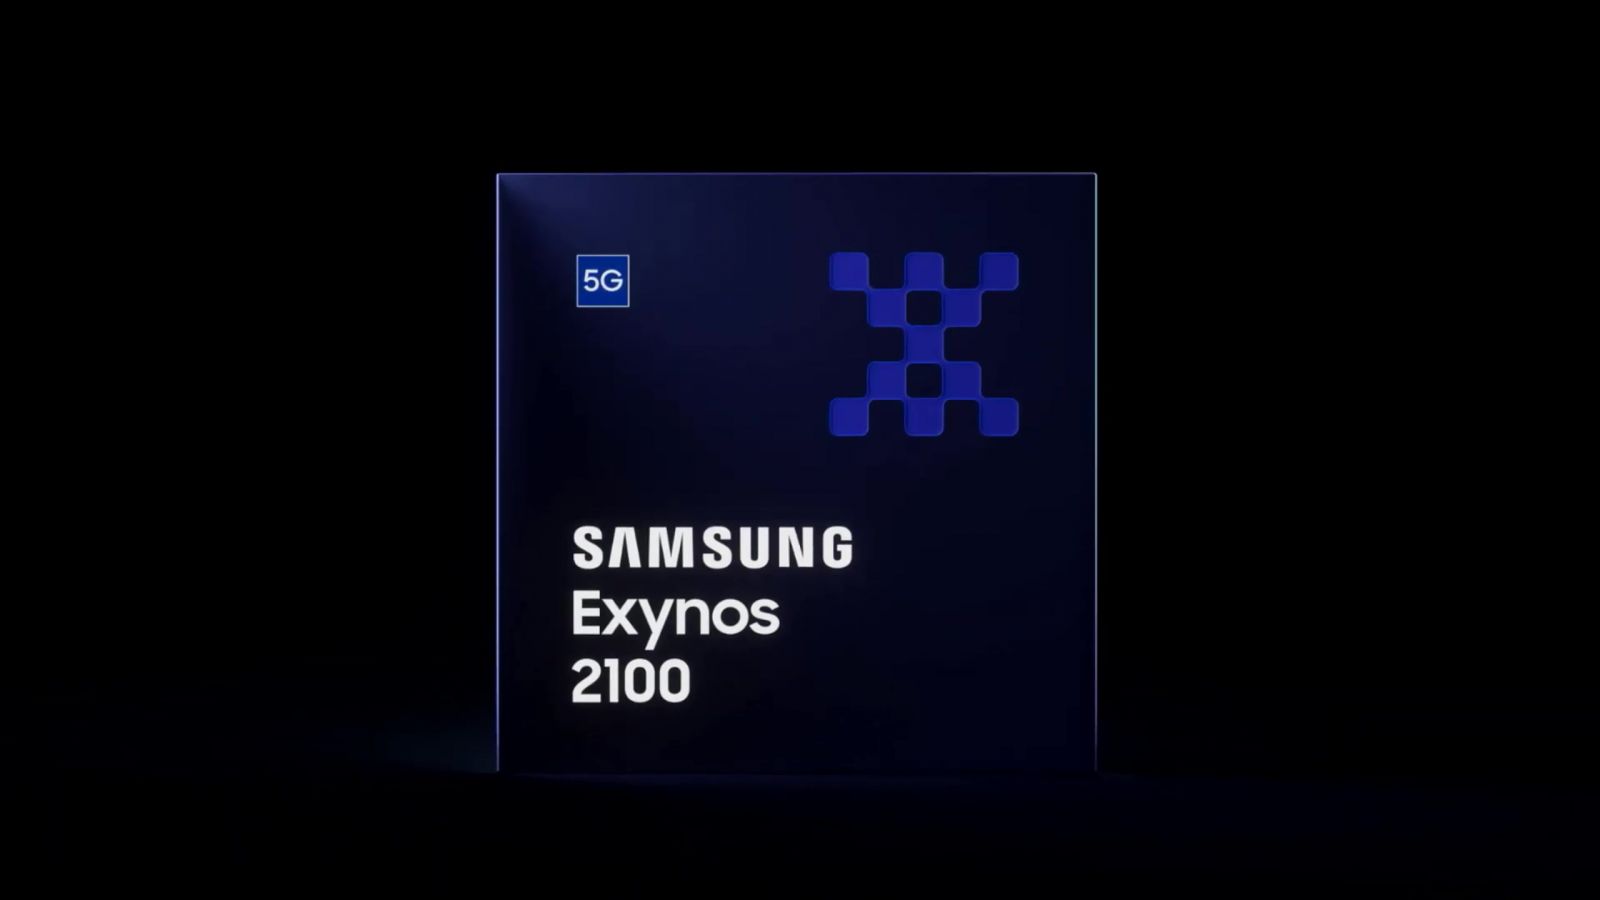 Exynos On Official Replay _ Samsung_20210113_142527.730.jpg